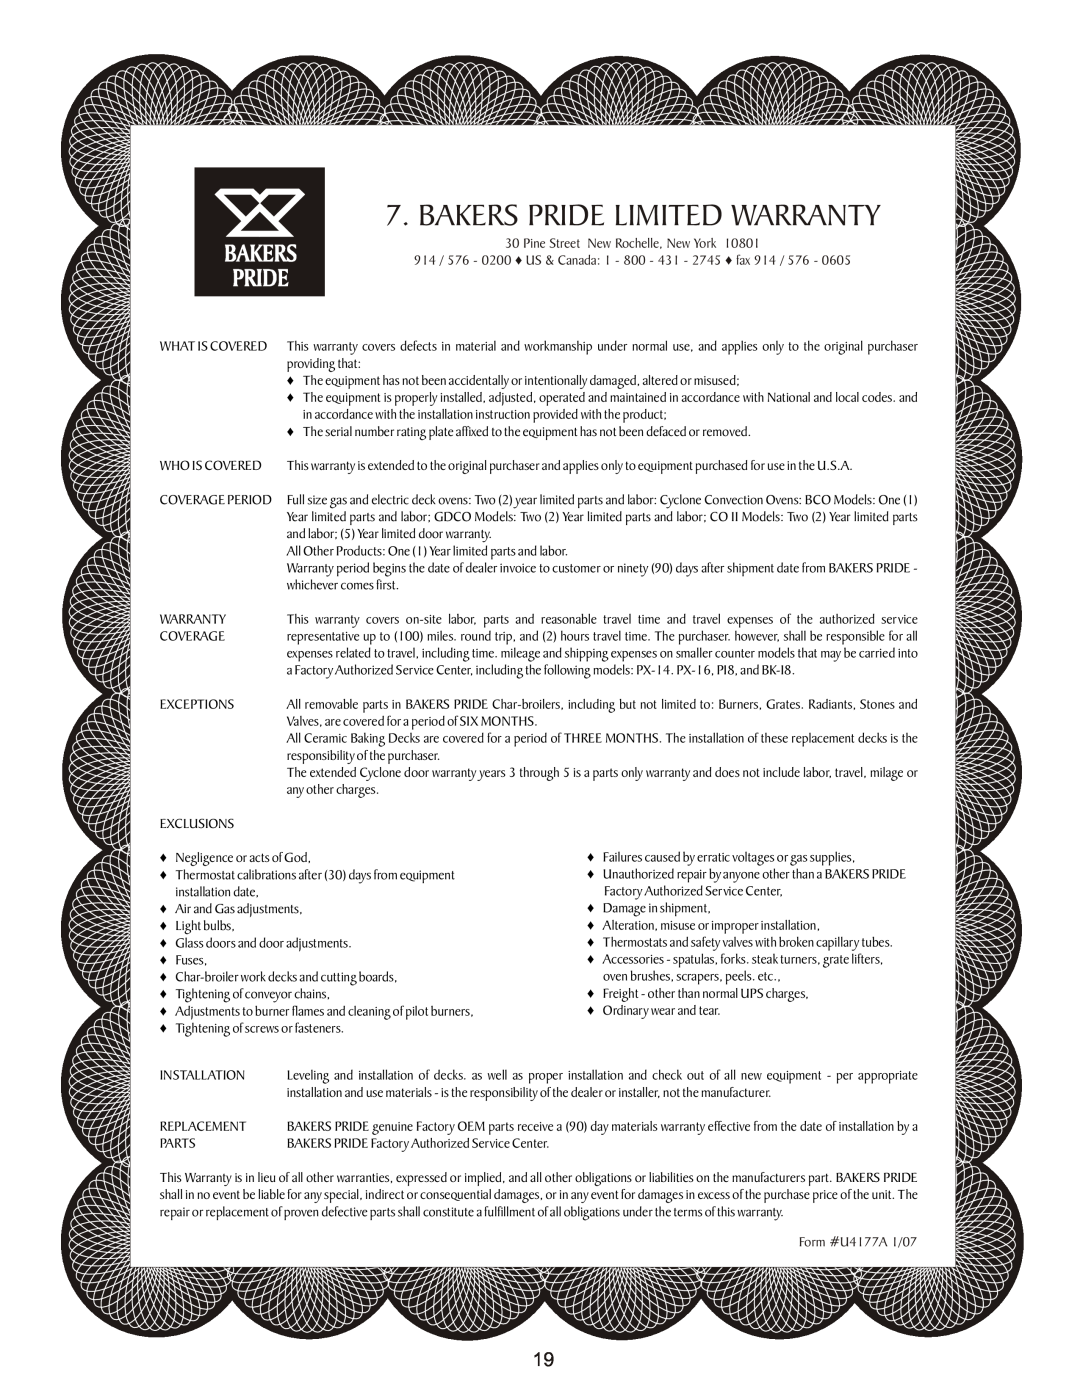 Bakers Pride Oven CO-11E manual Bakers Pride Limited Warranty, Pine Street New Rochelle, New York, Form #U4177A 1/07 